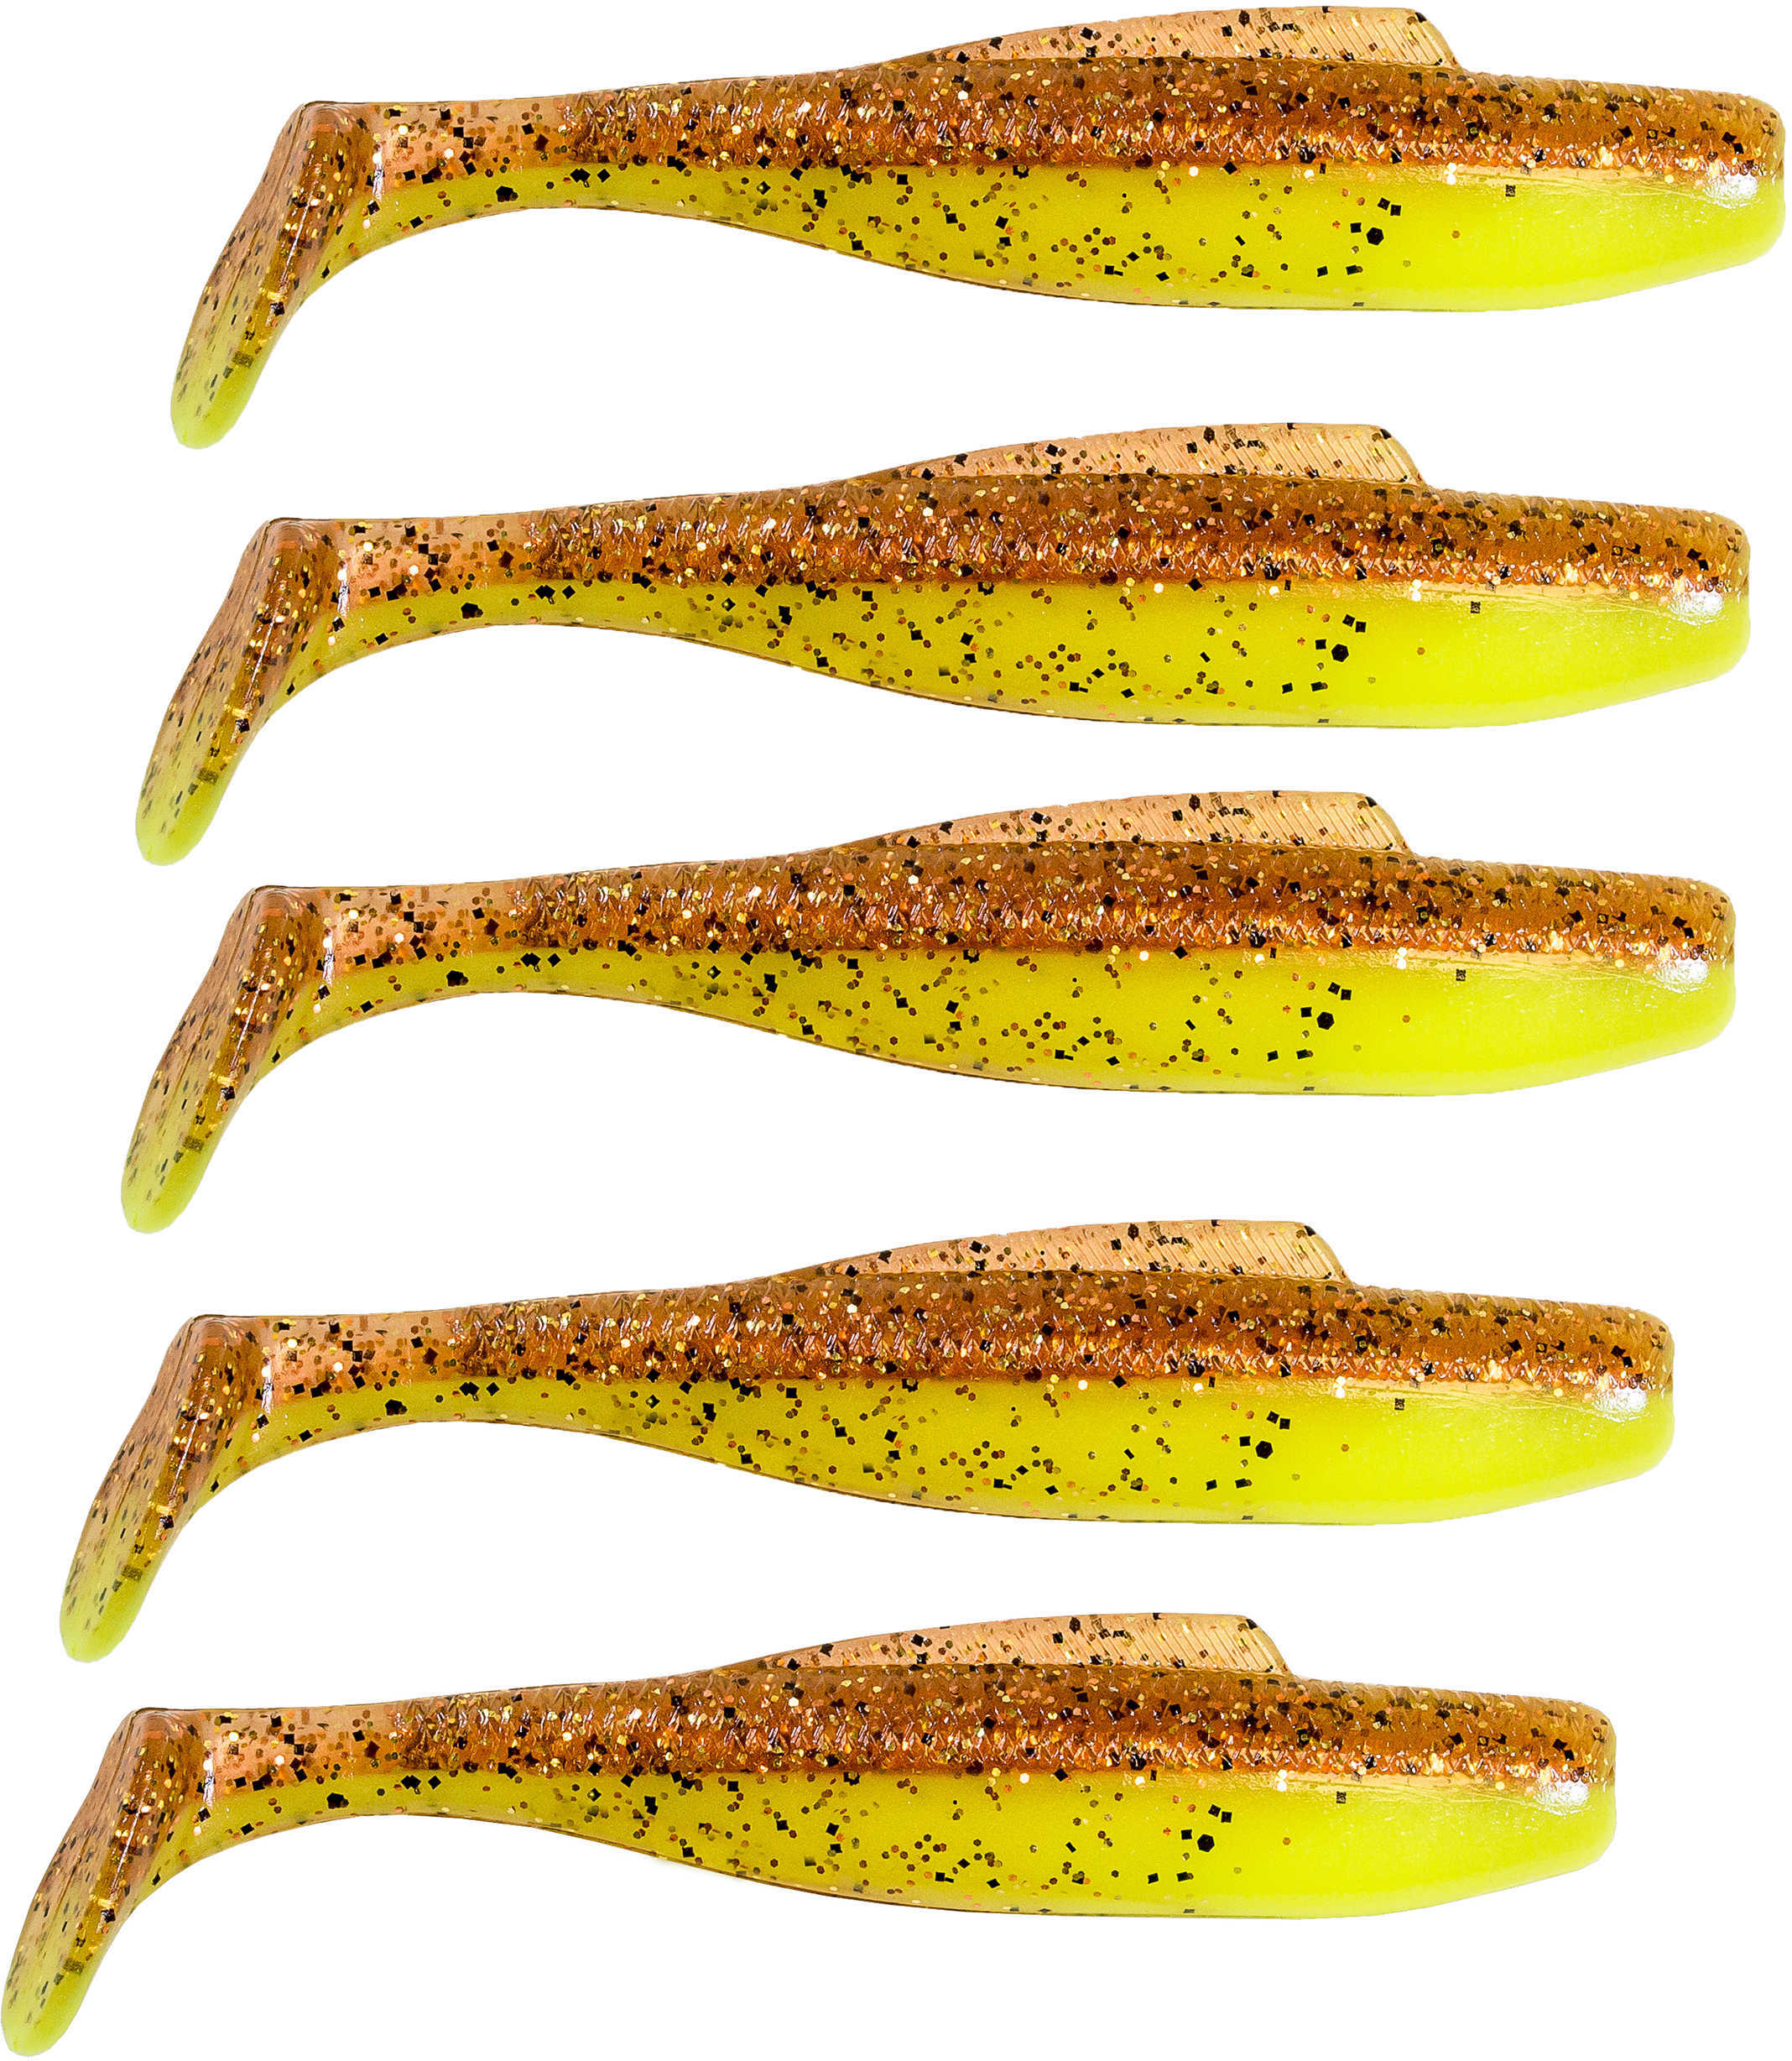 Z-Man DieZel MinnowZ Lures 4" Length, Sexy Penny, Package of 5